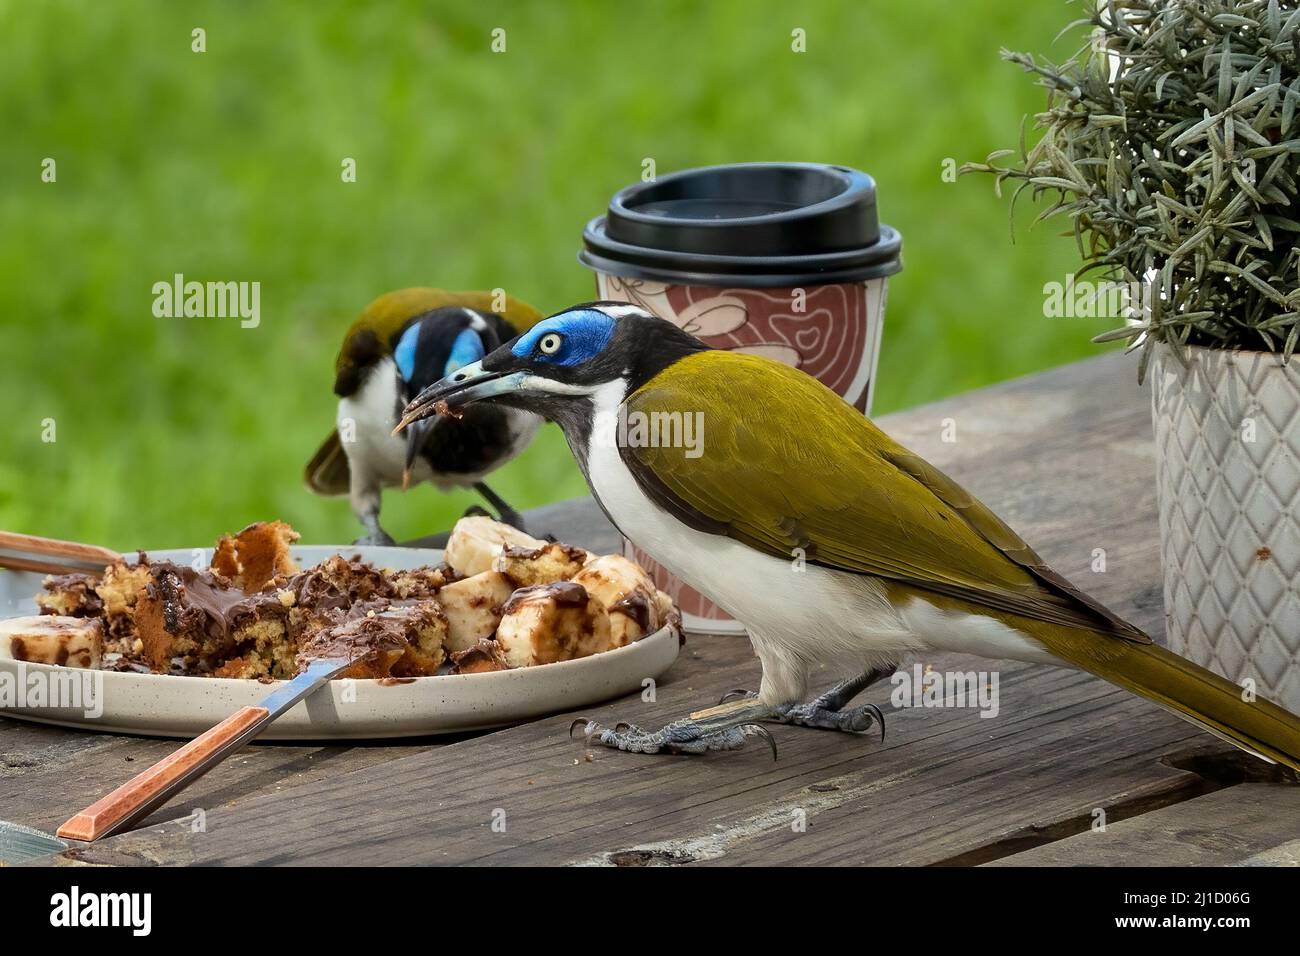 A Blue-faced Honeyeater swooping down and eating a left over meal on a table at an outdoor coffee shop Stock Photo